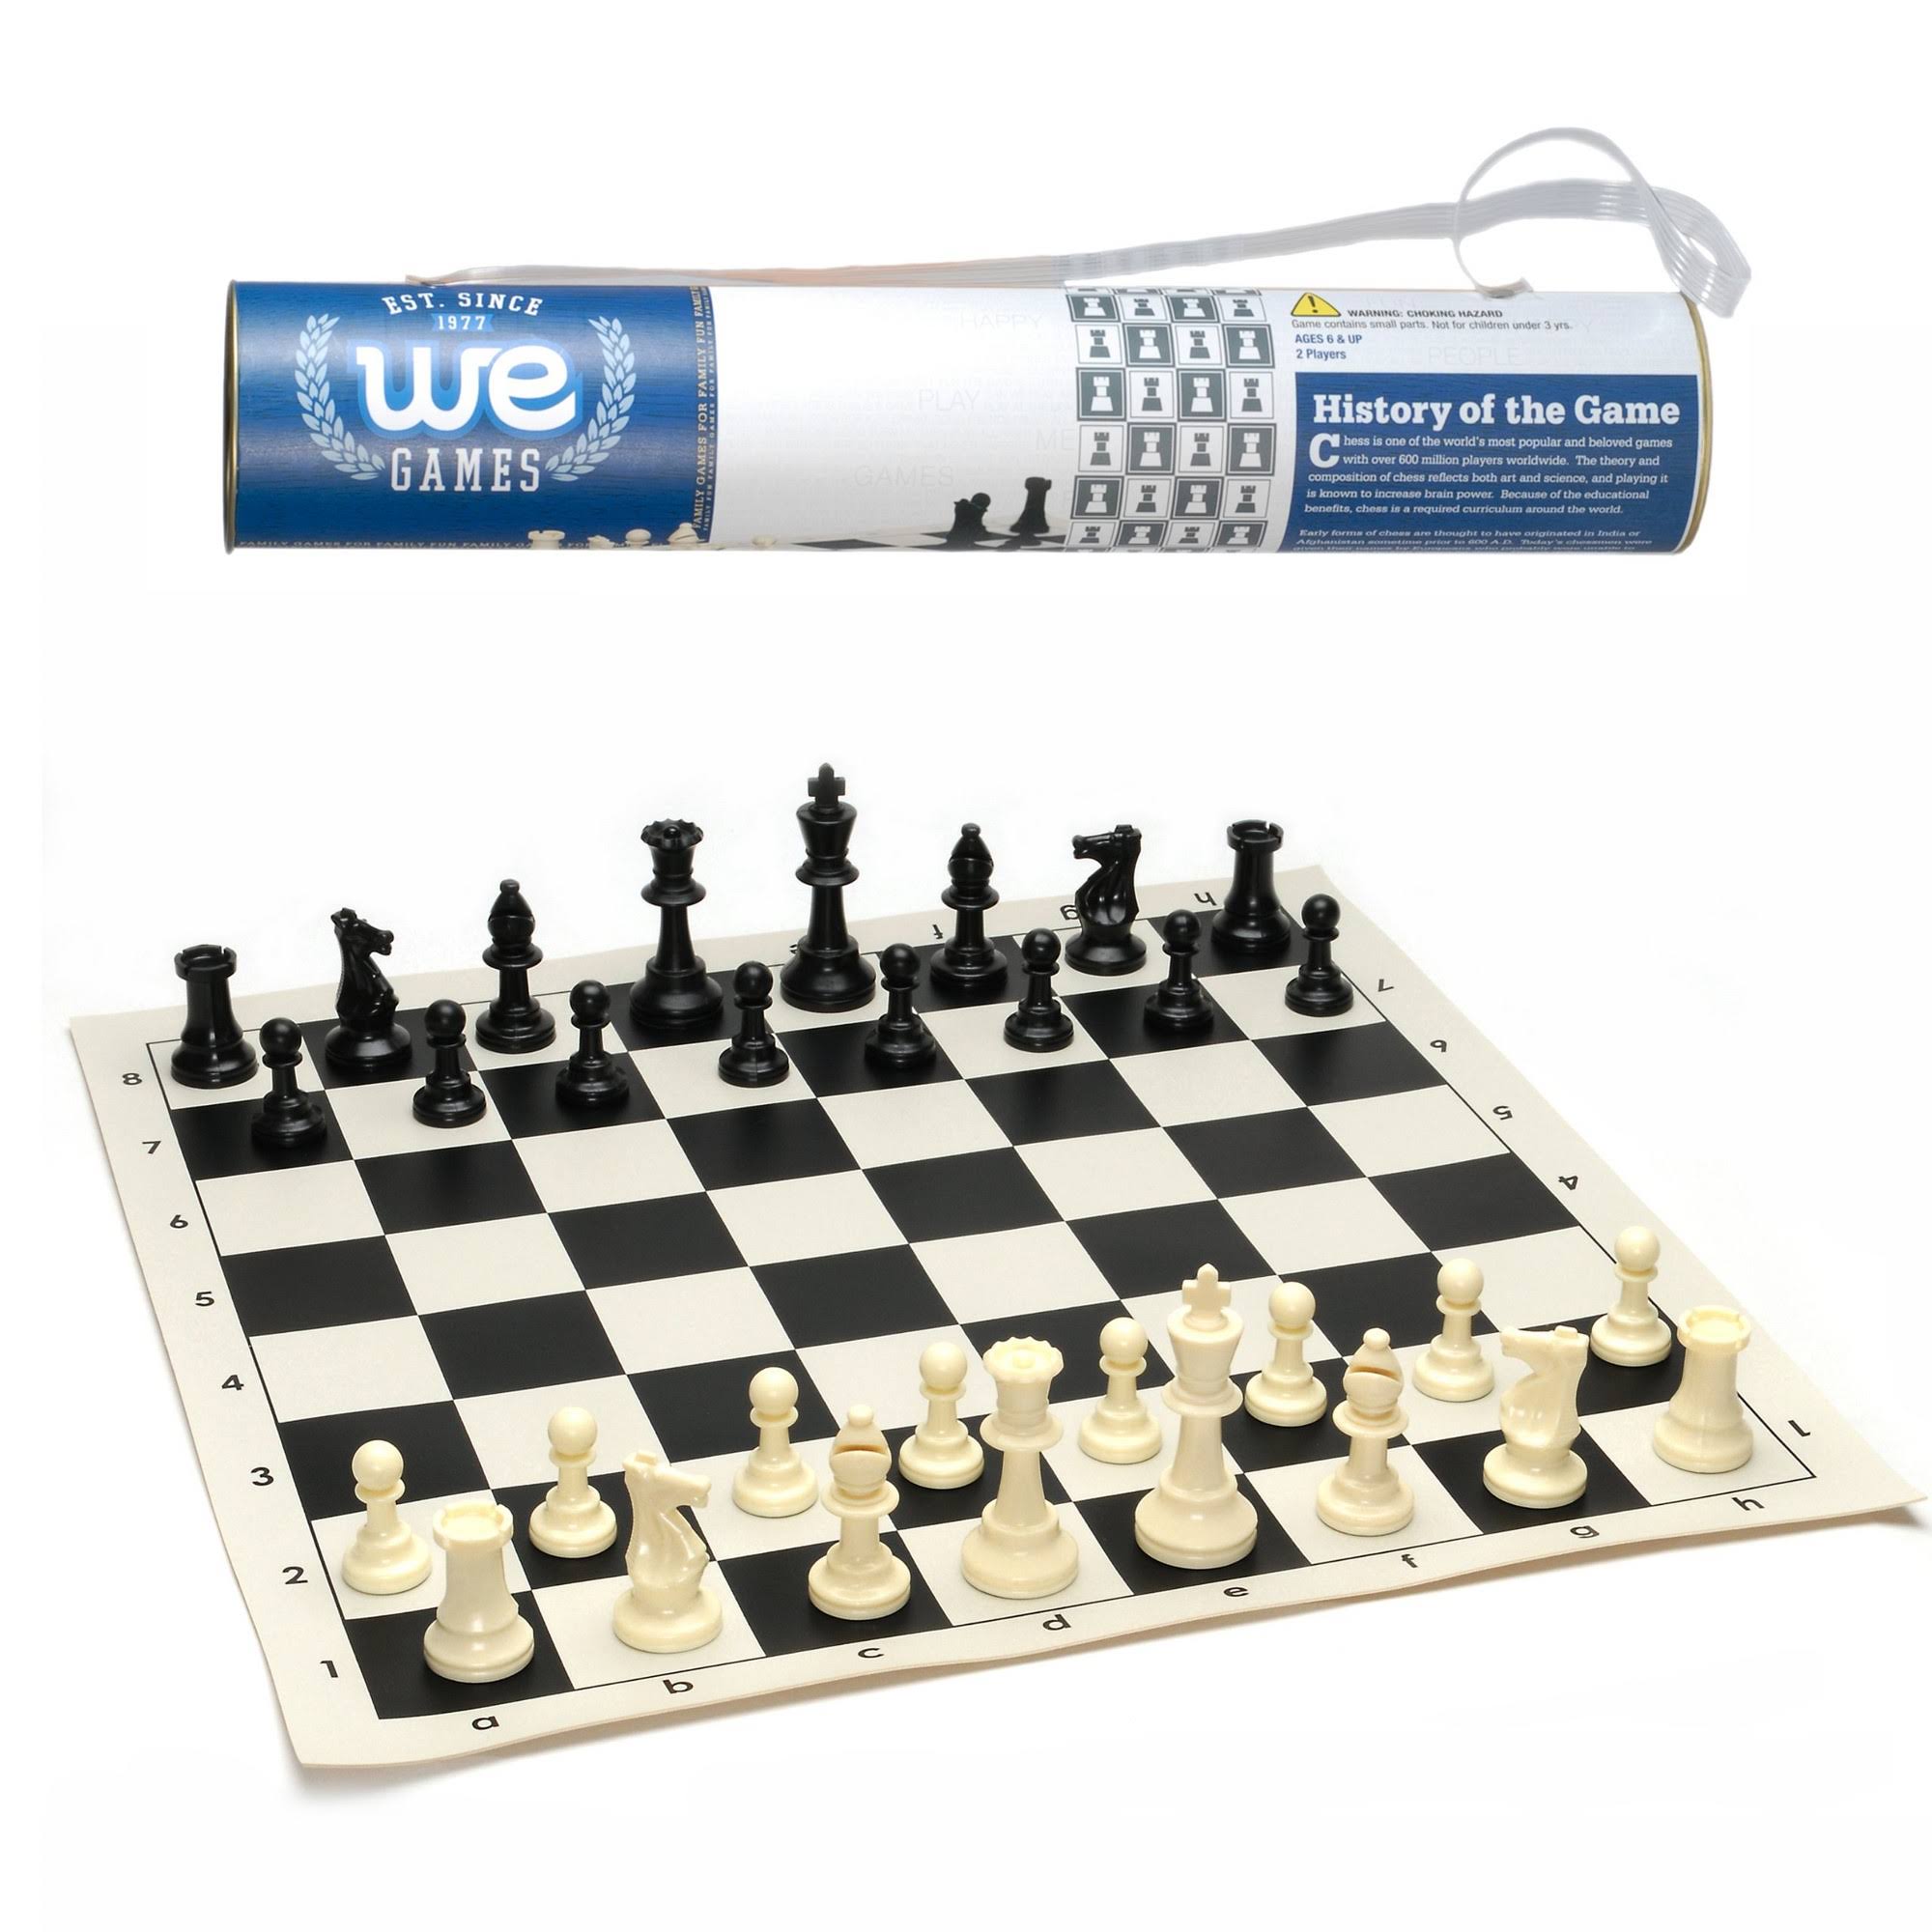 Tournament Roll-Up Chess Set in Carrying Tube